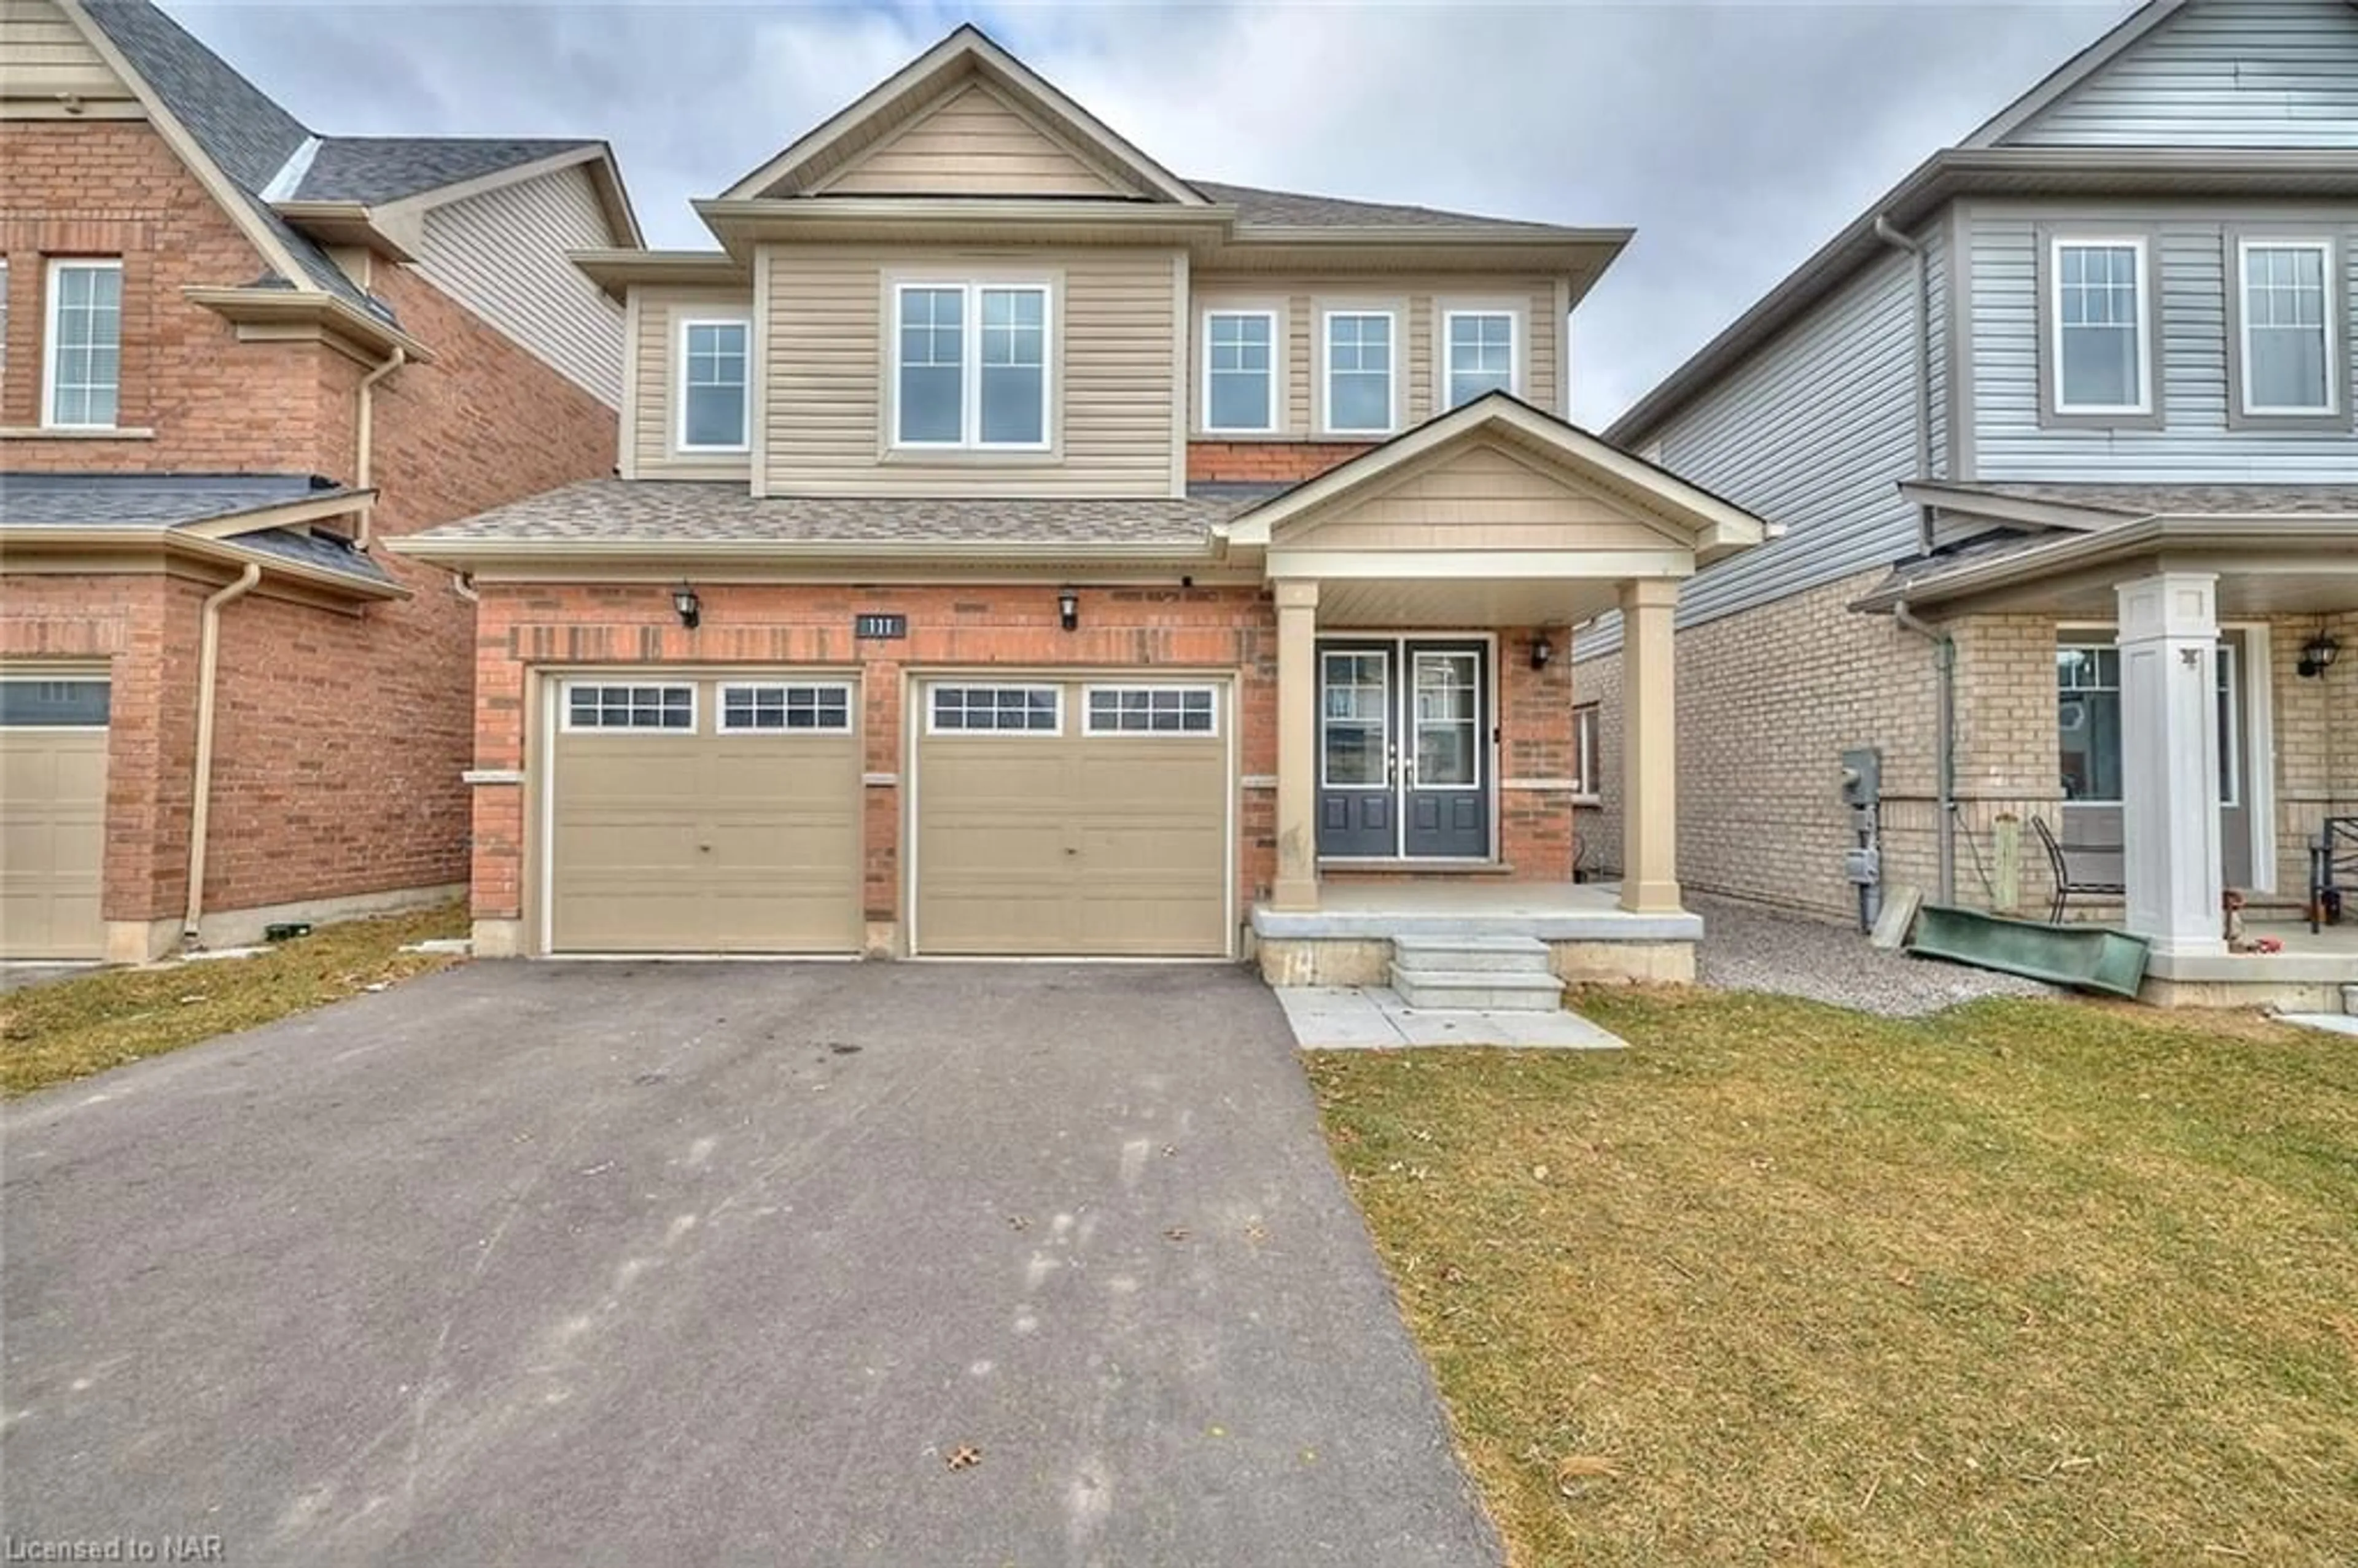 Home with brick exterior material for 111 Tumblewood Place Pl, Welland Ontario L3B 0J3